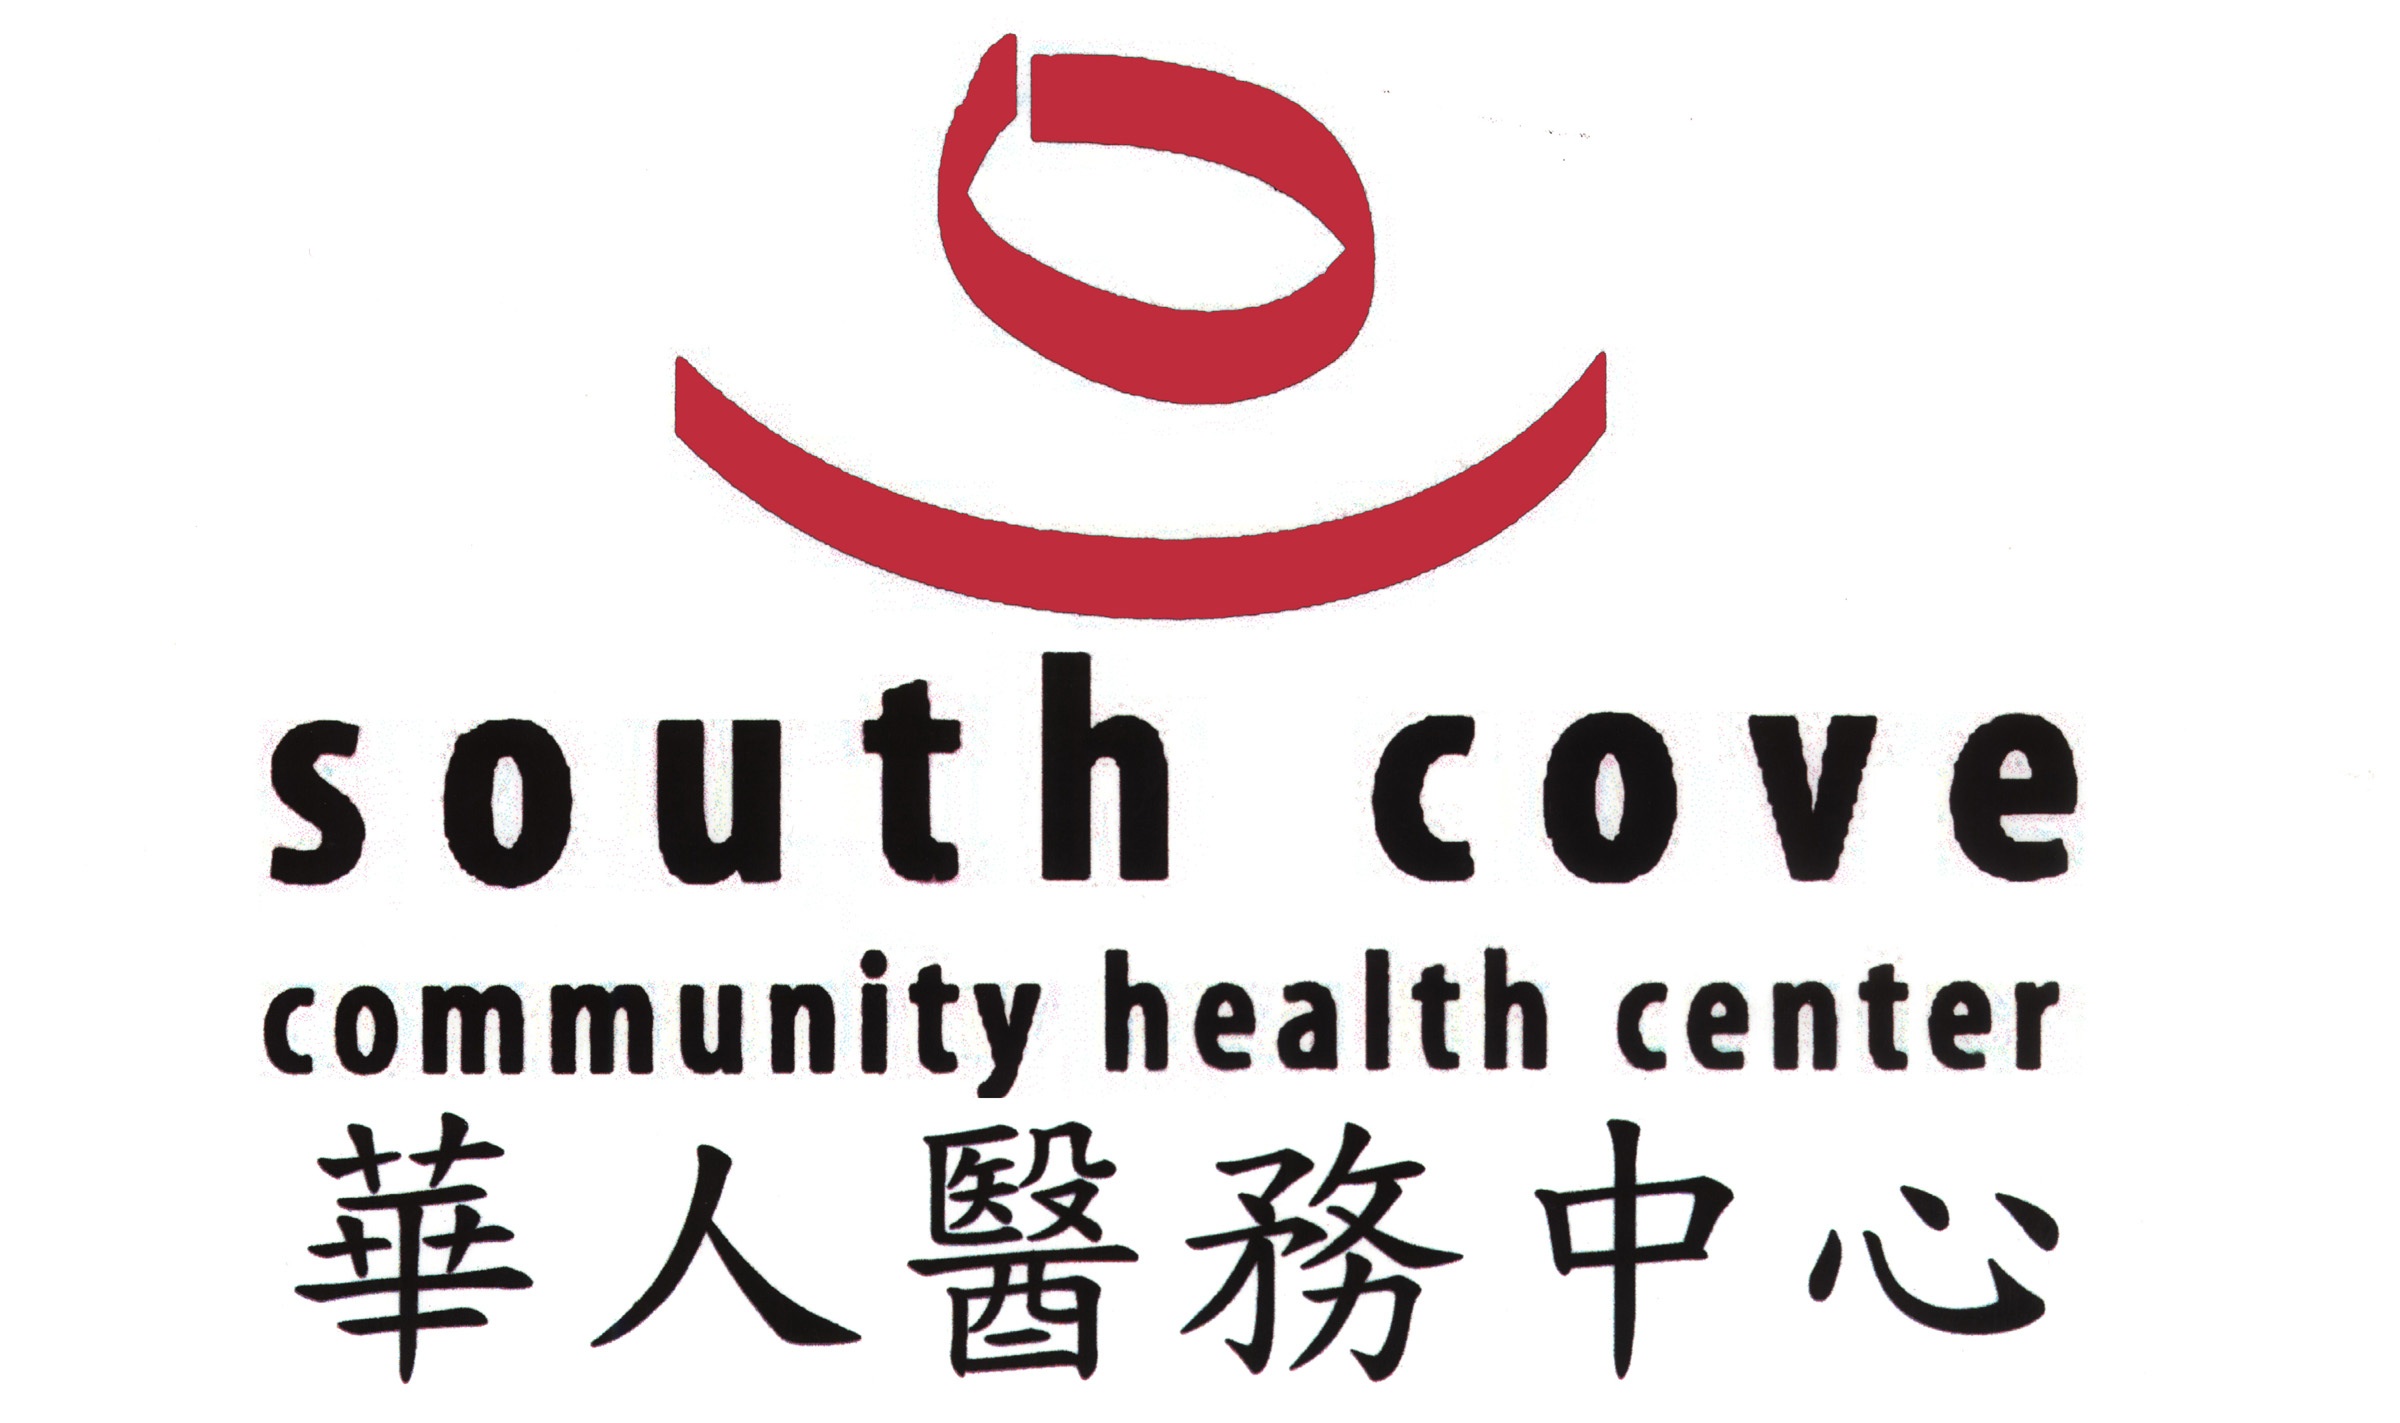 South Cove Community Health Center- South Street Clinic